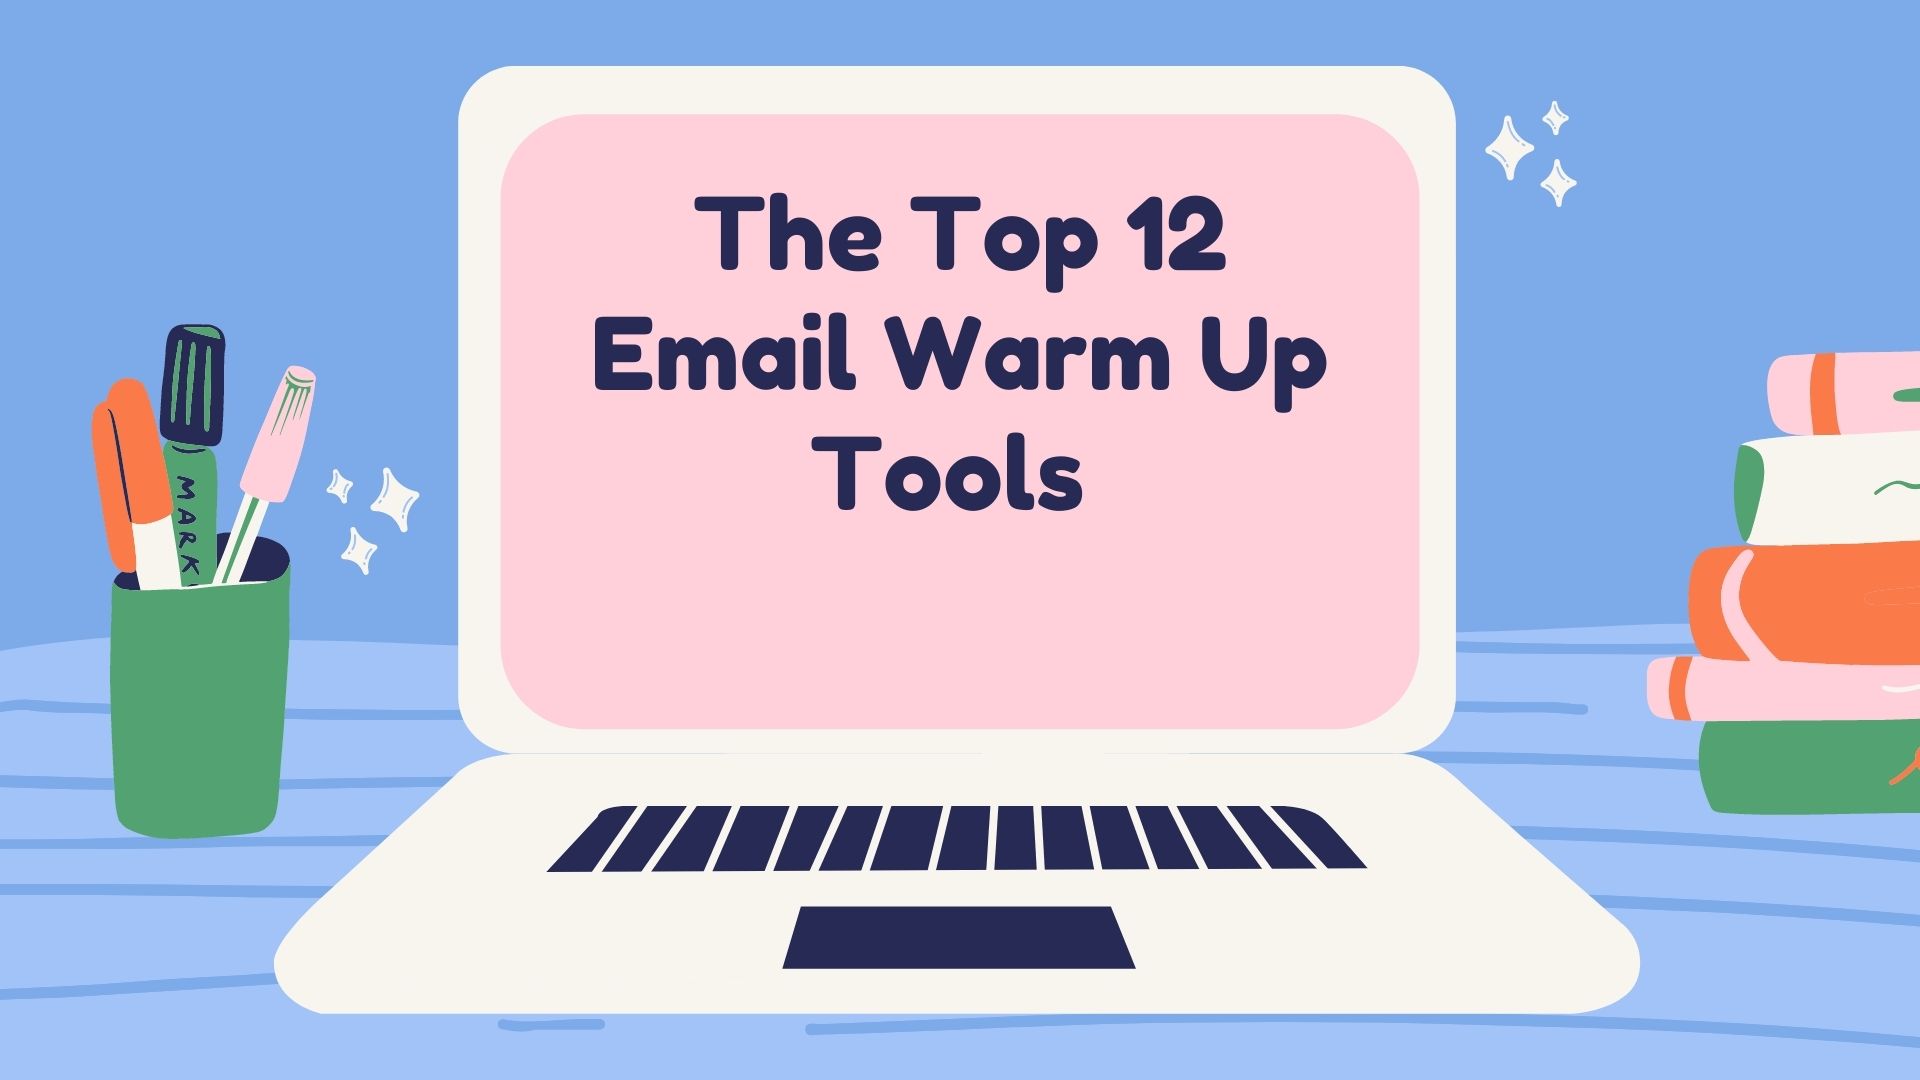 Email-Warm-Up-Tools-The-Top-12